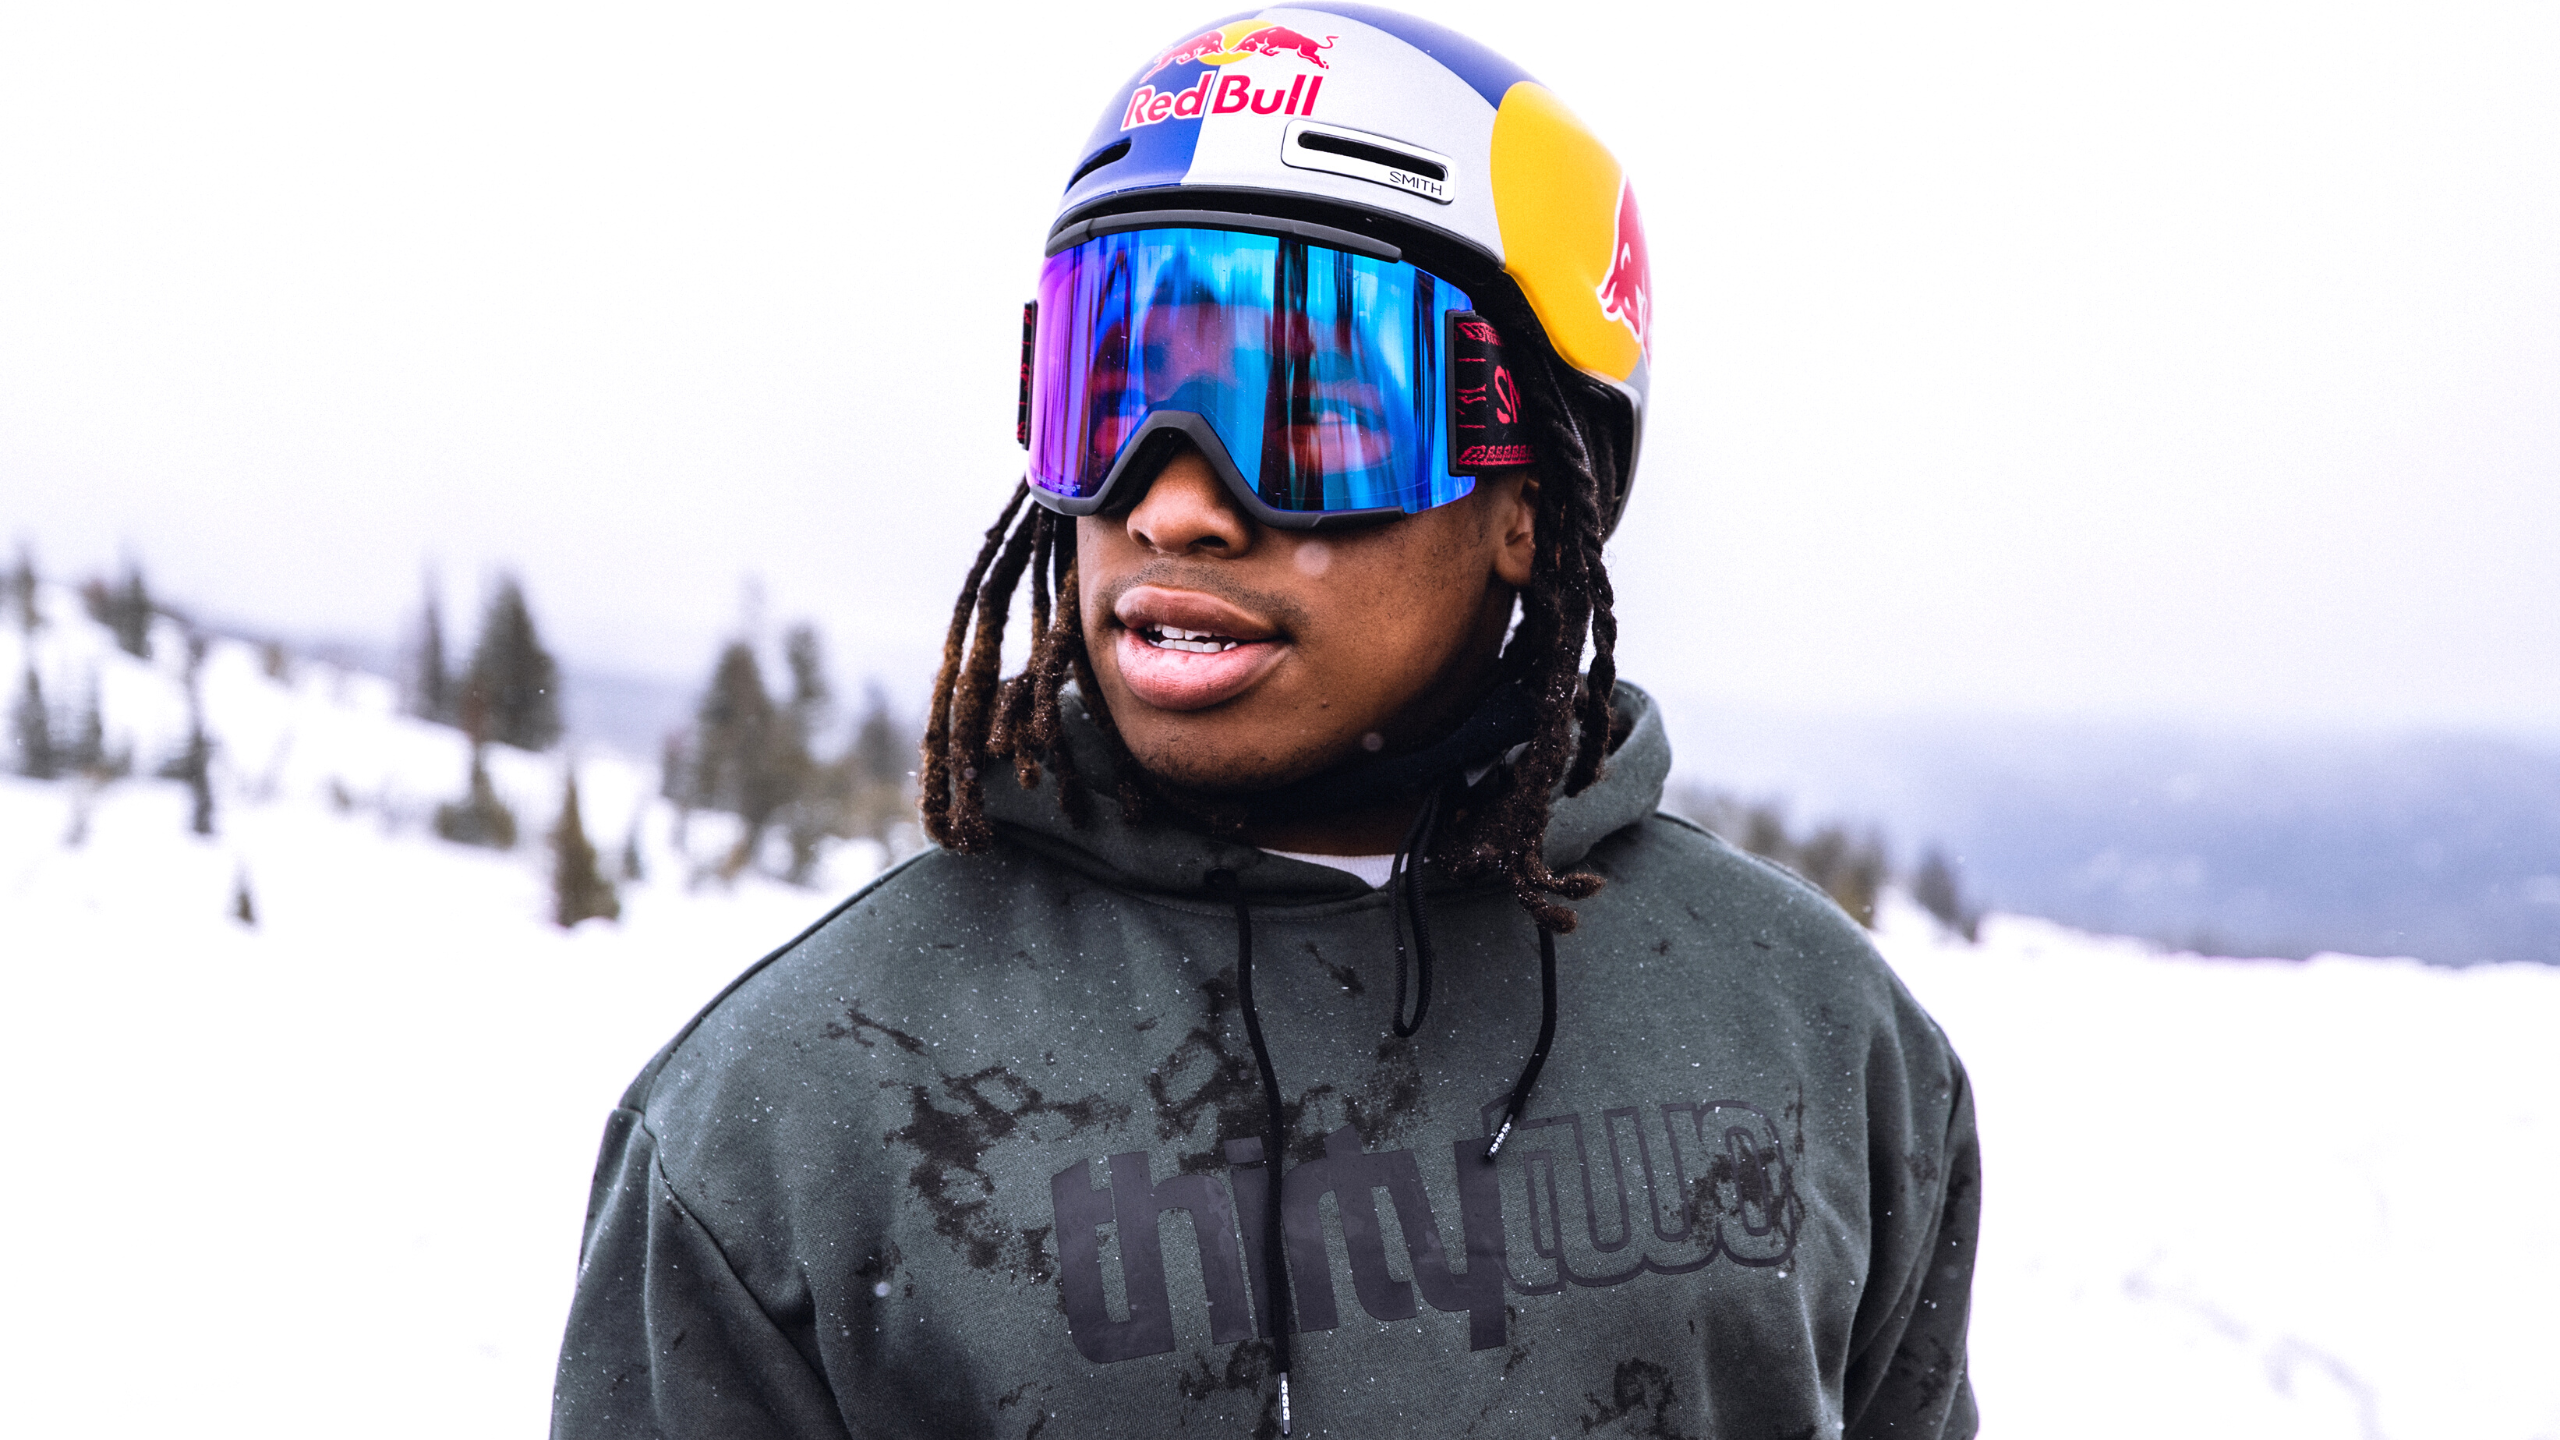 Zeb Powell on Being a Role Model and What Inspired His Goggle Design